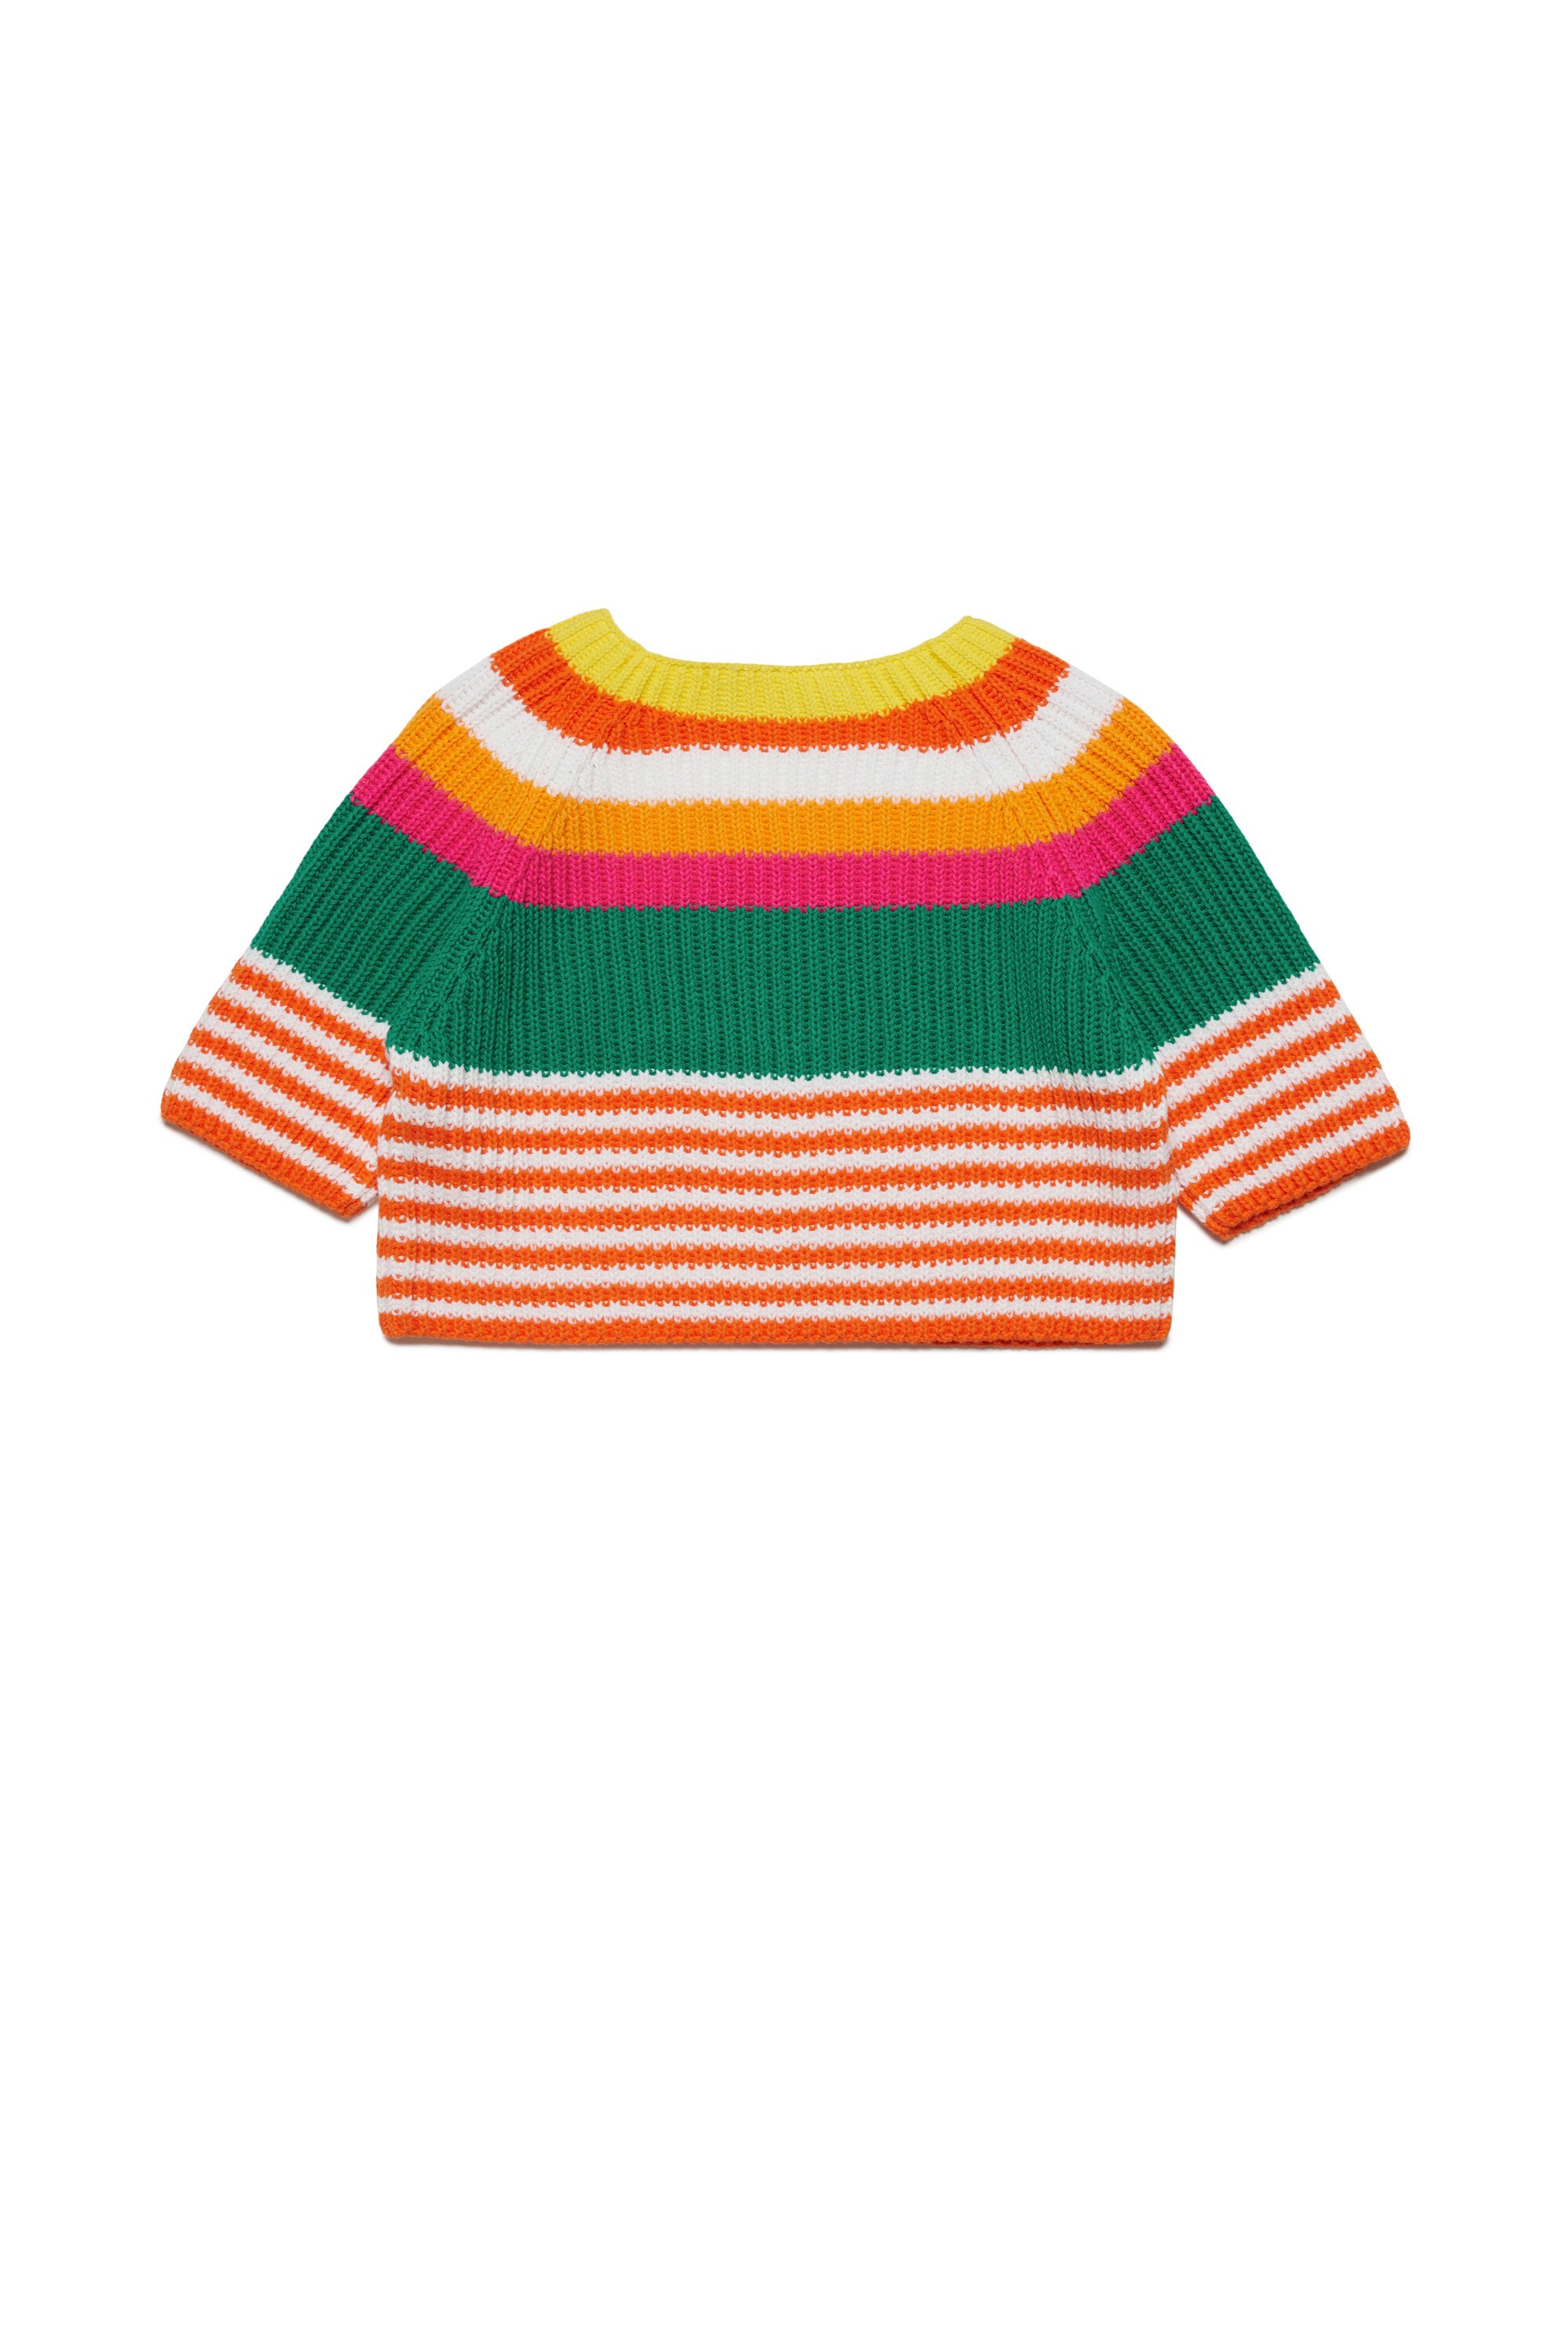 English striped knit pullover